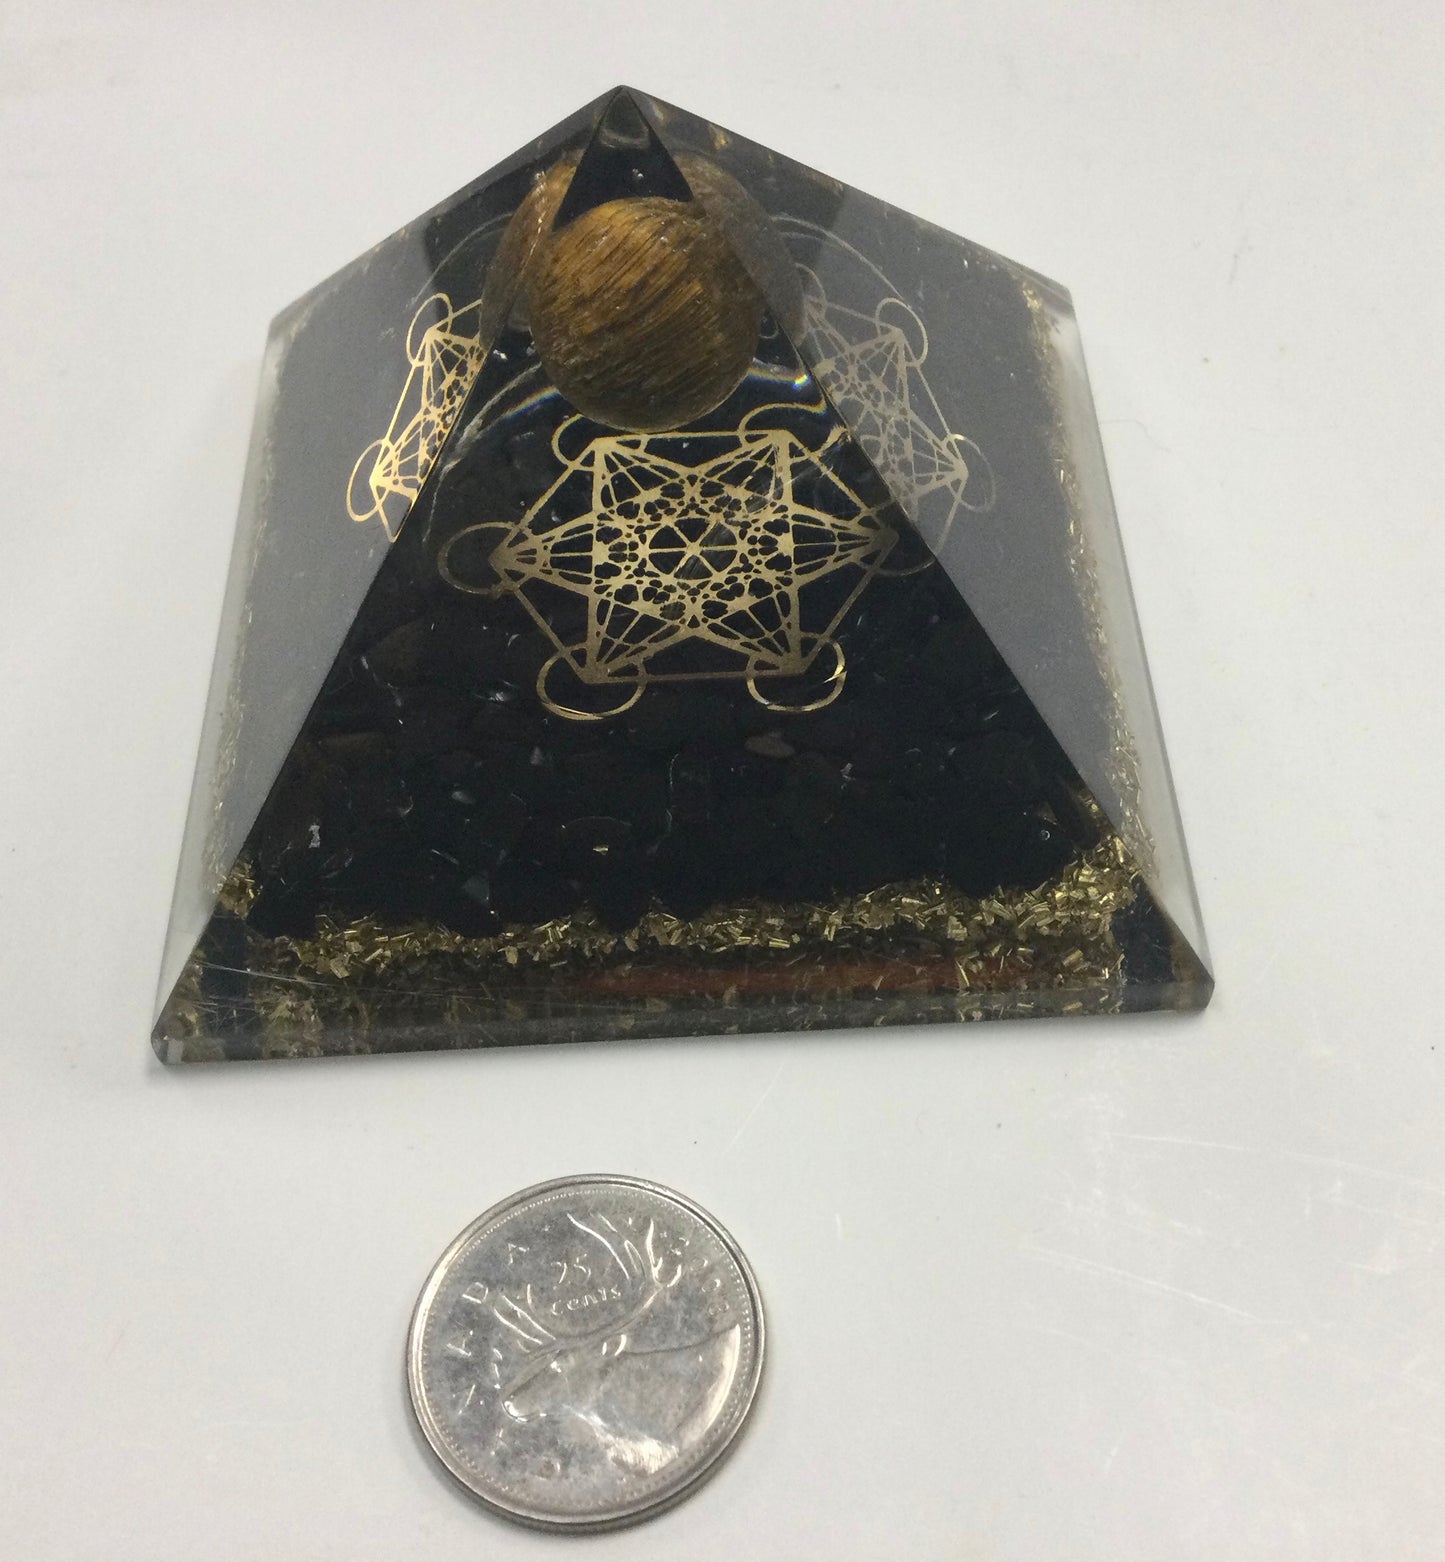 Orgonite Tourmaline Pyramid with Metratron’s Cube & Tiger’s Eye Sphere